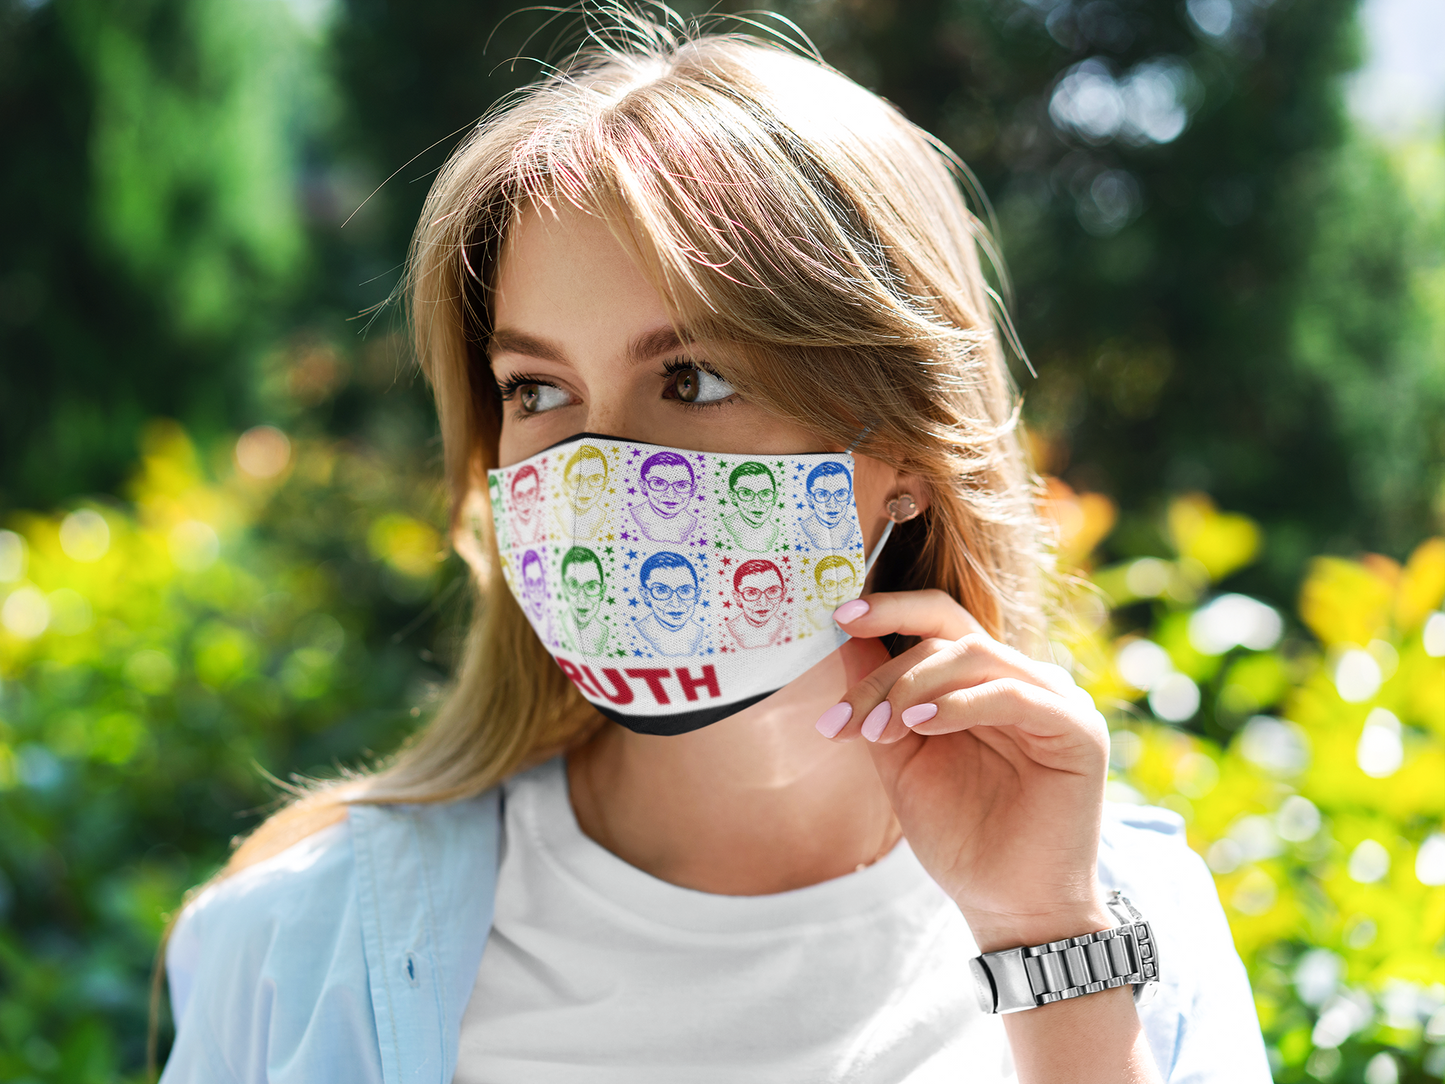 Truth Fabric Face Mask from Vluxe by Lucky Nahum